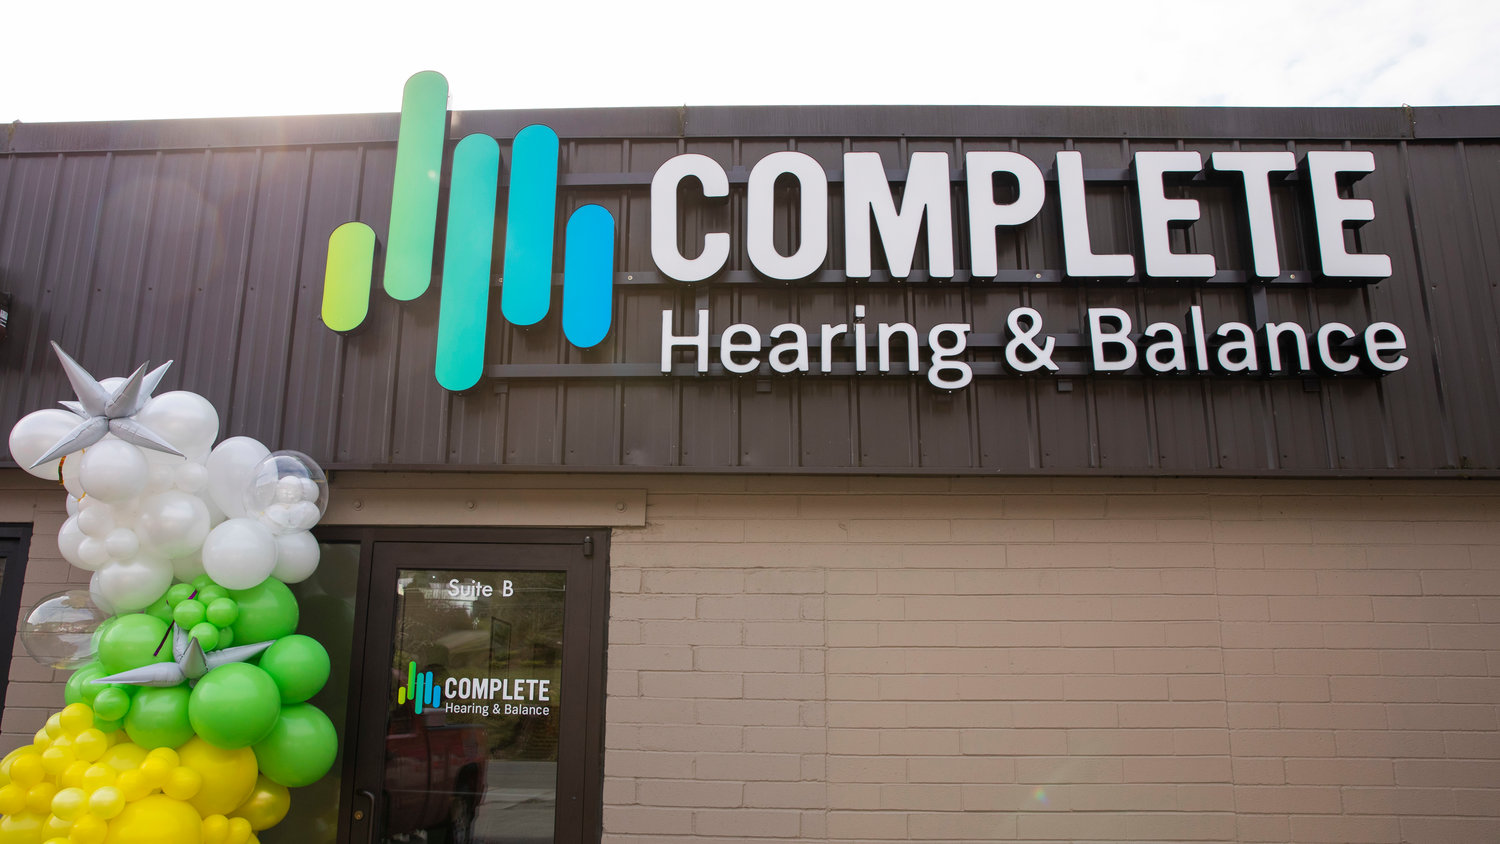 Complete Hearing and Balance is located at 1817 South Market Boulevard, Suite B, in Chehalis.